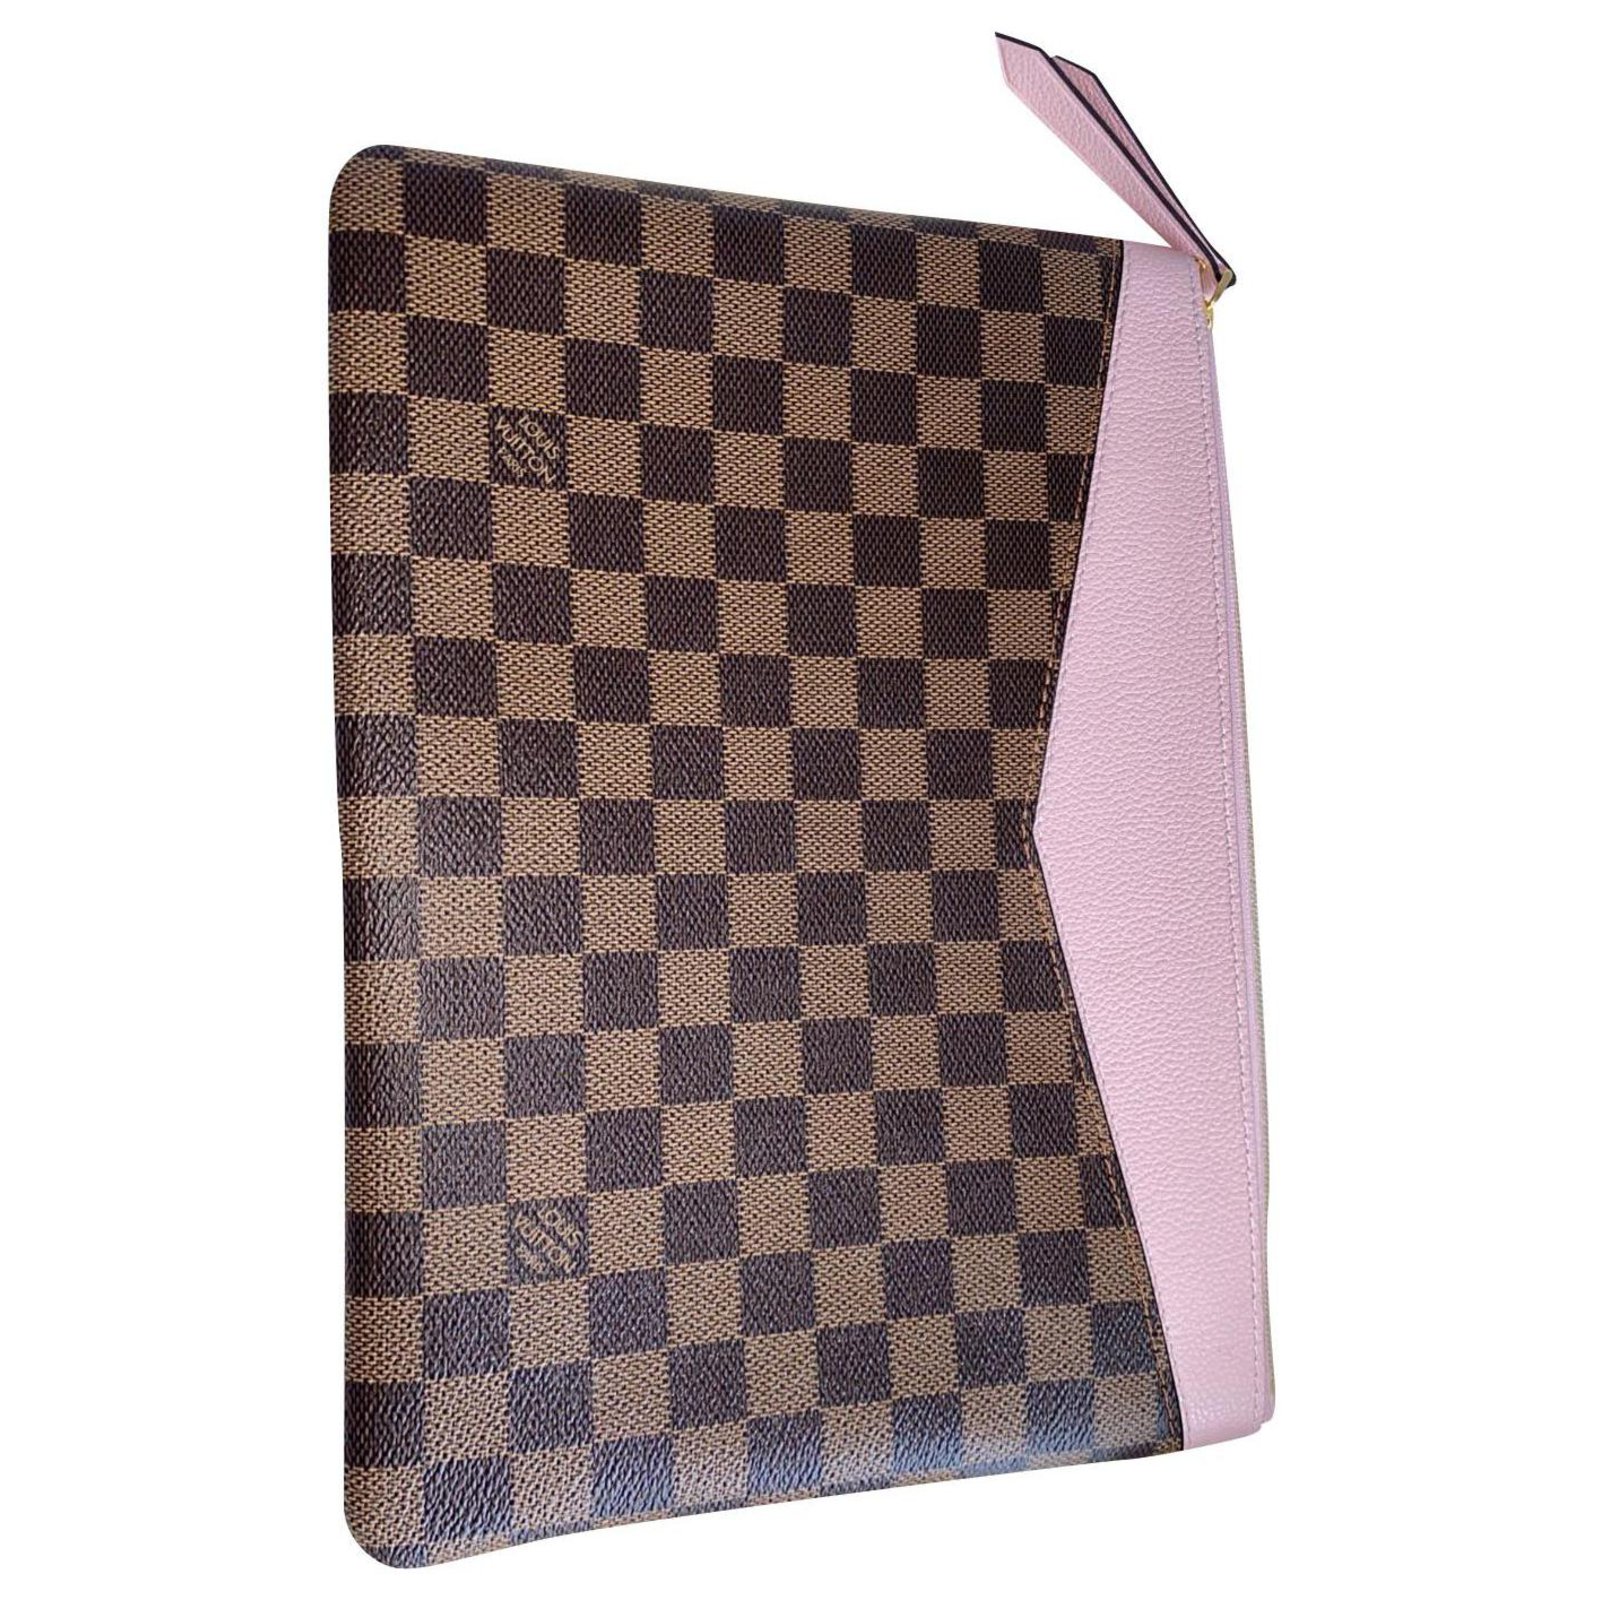 Louis Vuitton Daily Pouch Clutch Monogram with Peach - A World Of